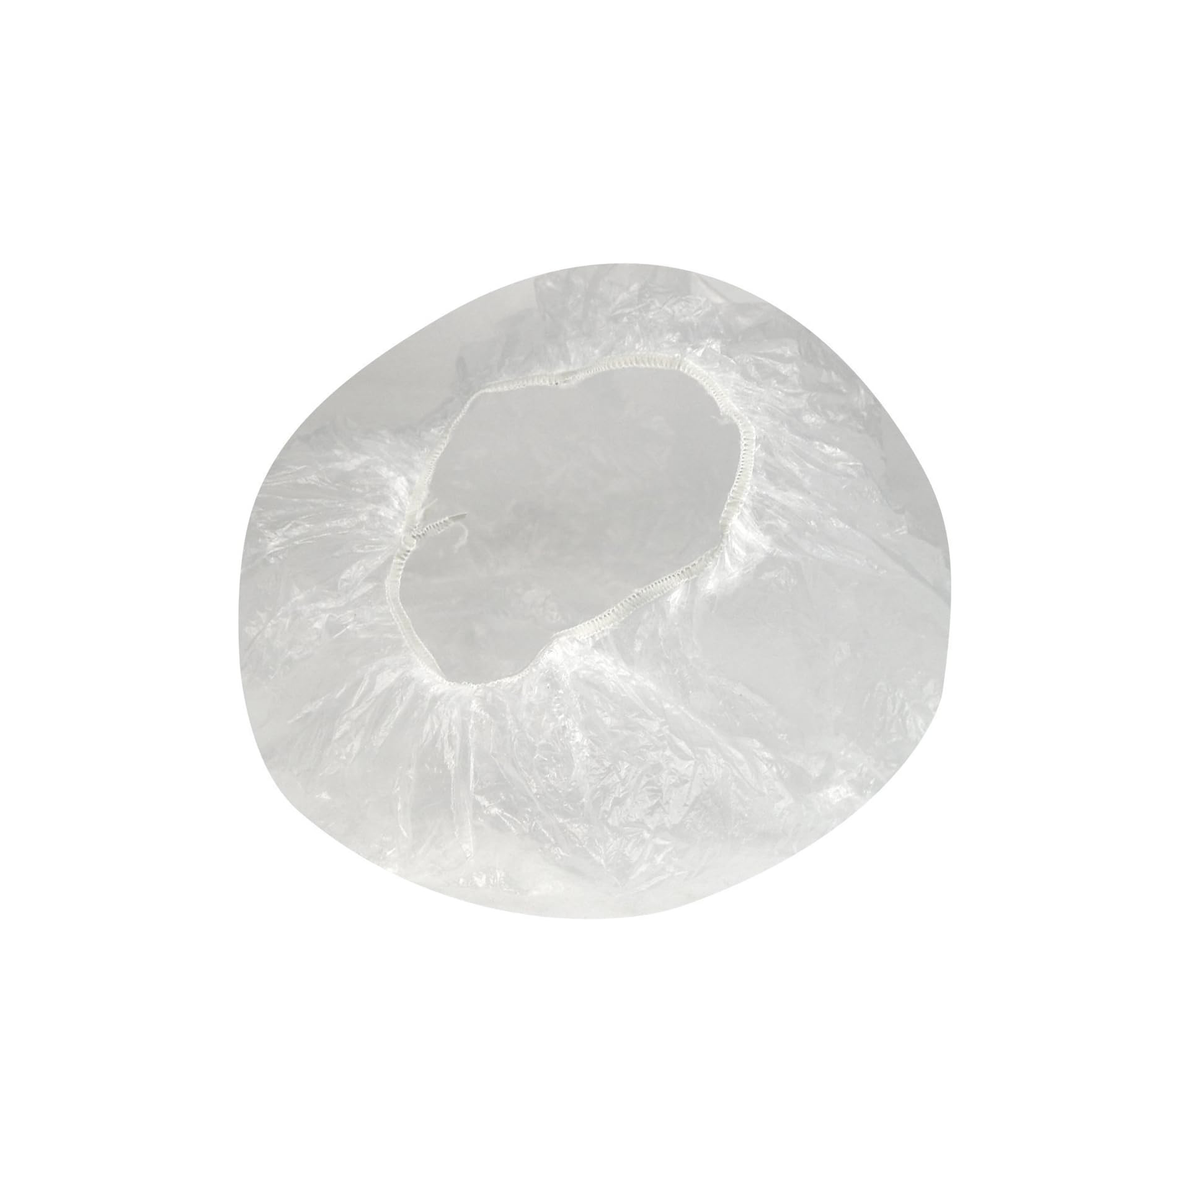 Disposable Processing & Shower Caps - Latex Free | Hypoallergenic - Allergy Friendly - Naturally Free